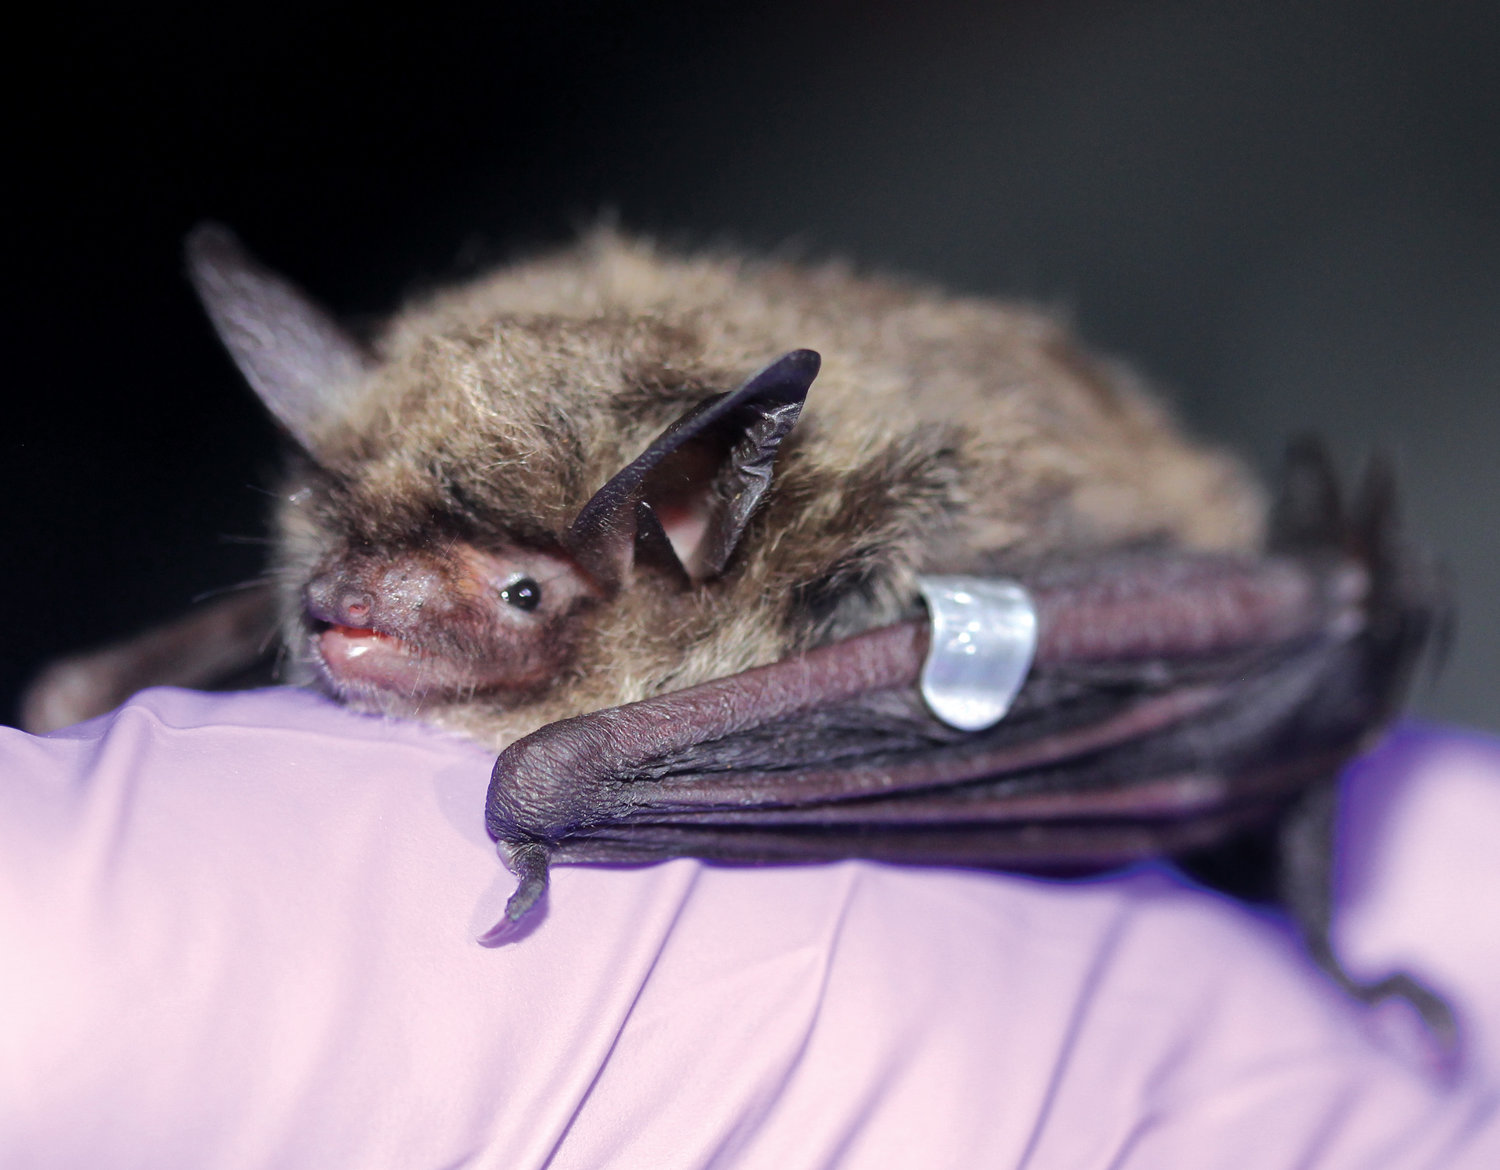 The northern long-eared bat has been re-classified from a threatened species to an endangered species.